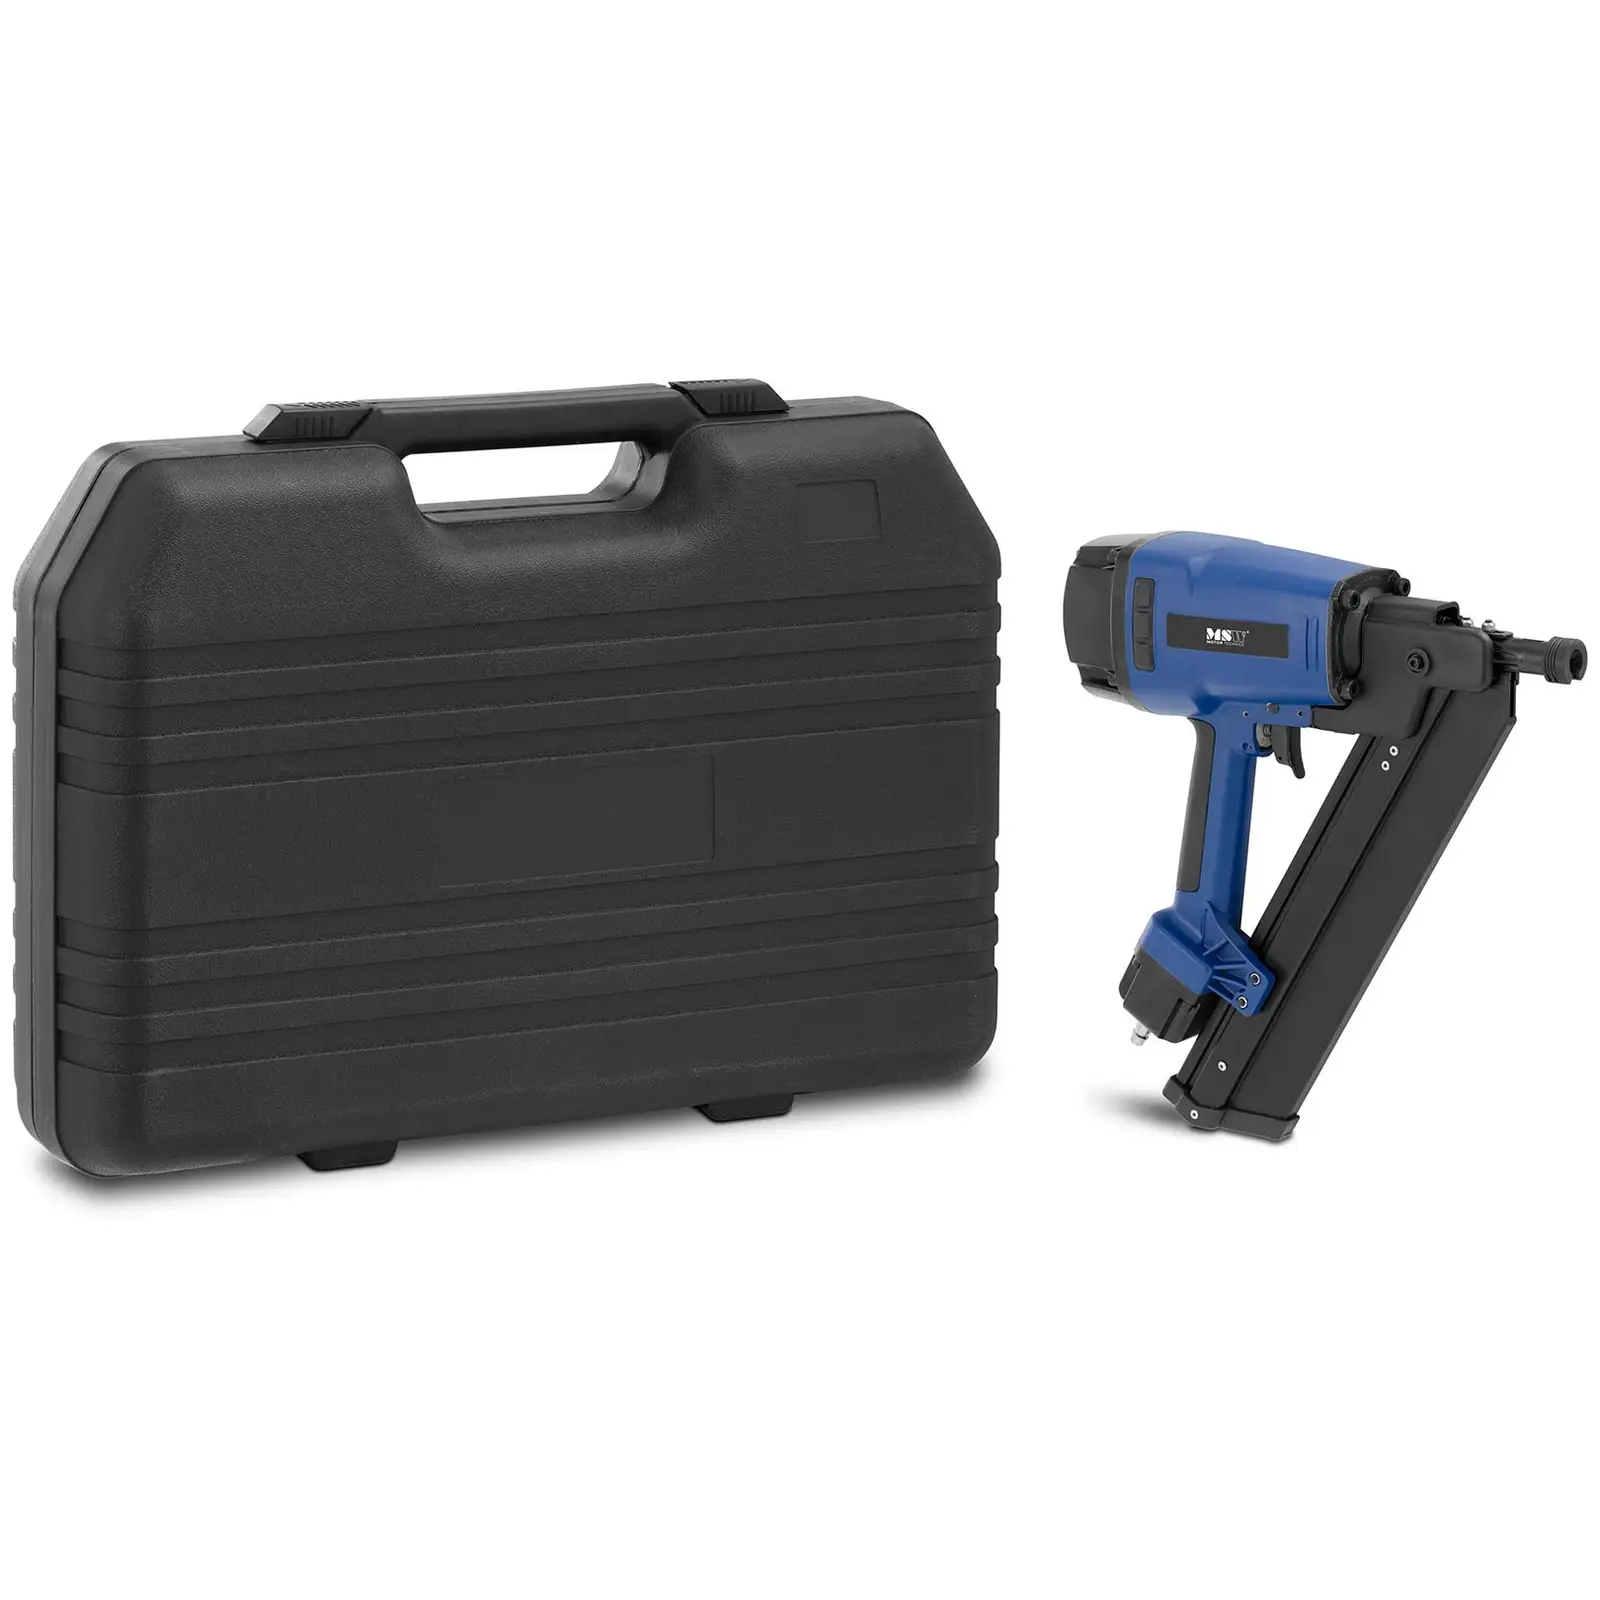 Factory second Air Nail Gun - magazine angle 34° - for nail lengths: 50 - 90 mm - holds up to 70 nails